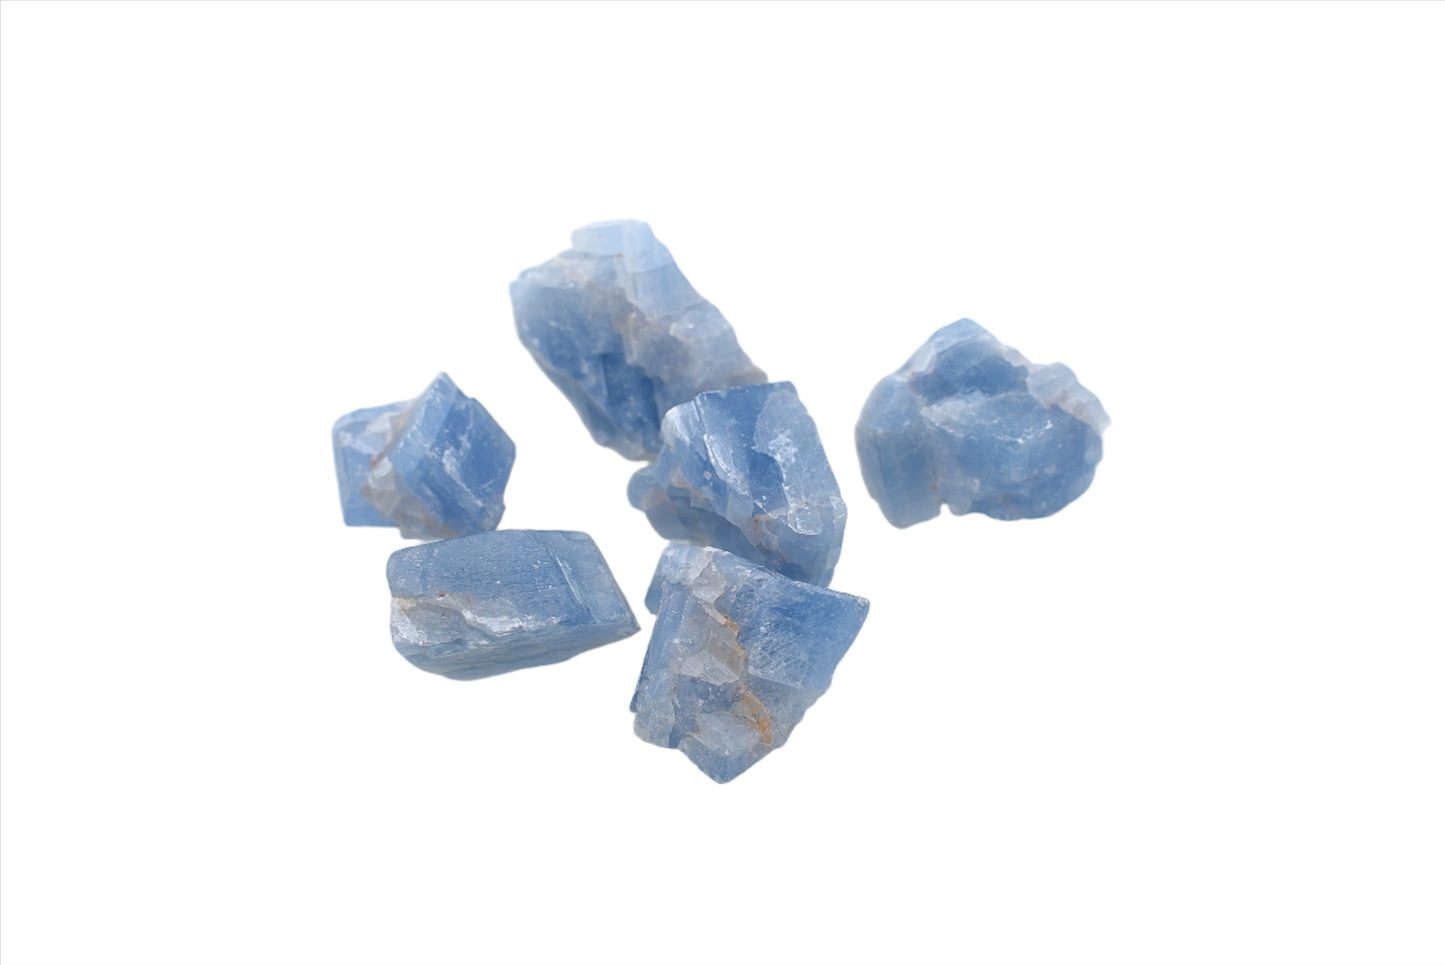 Natural, Hand-Selected Blue Calcite Rough Stone Individual Pieces